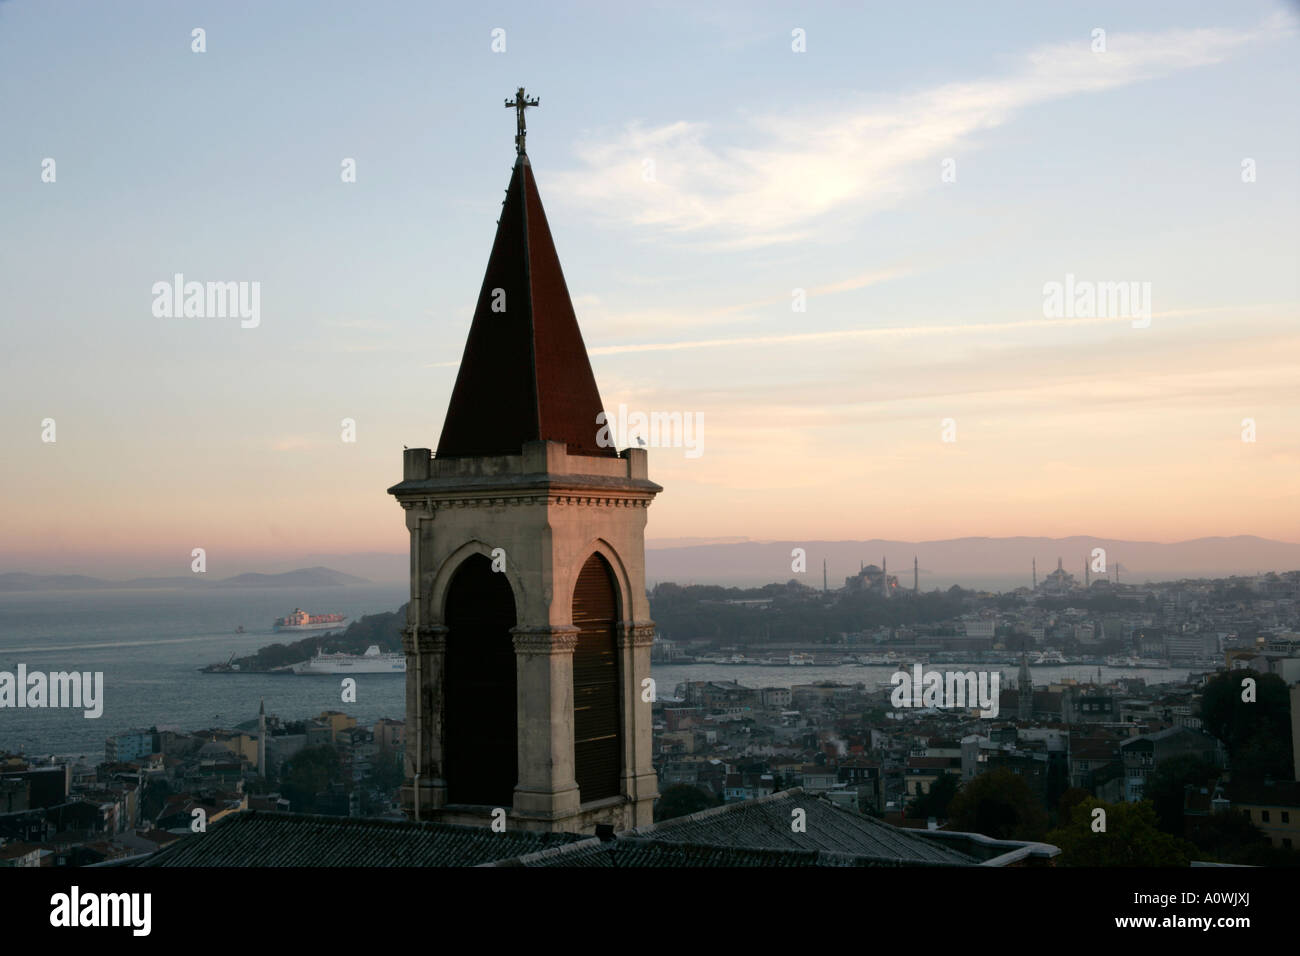 VIEW FROM SAINT ANTHONY'S CATHOLIC CHURCH, ISTANBUL, TURKEY, WITH THE BLUE MOSQUE AND AYA SOFYA IN THE BACKGROUND Stock Photo